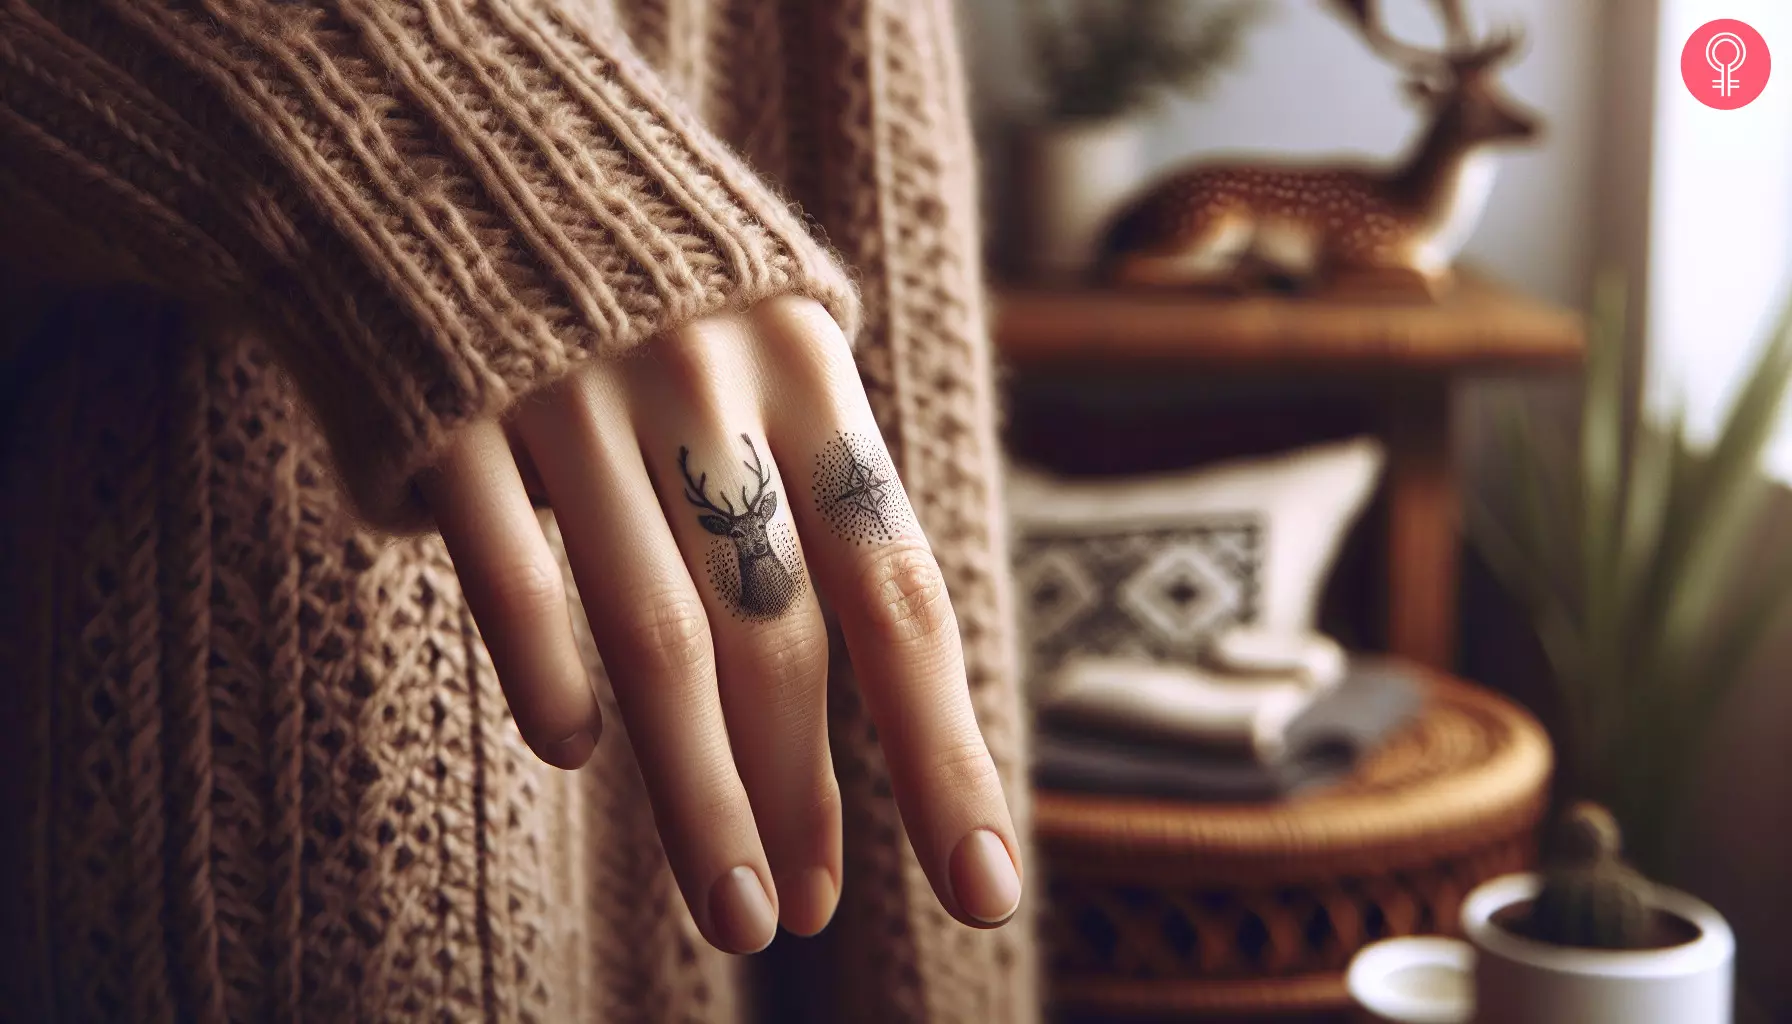 A deer tattoo on the finger